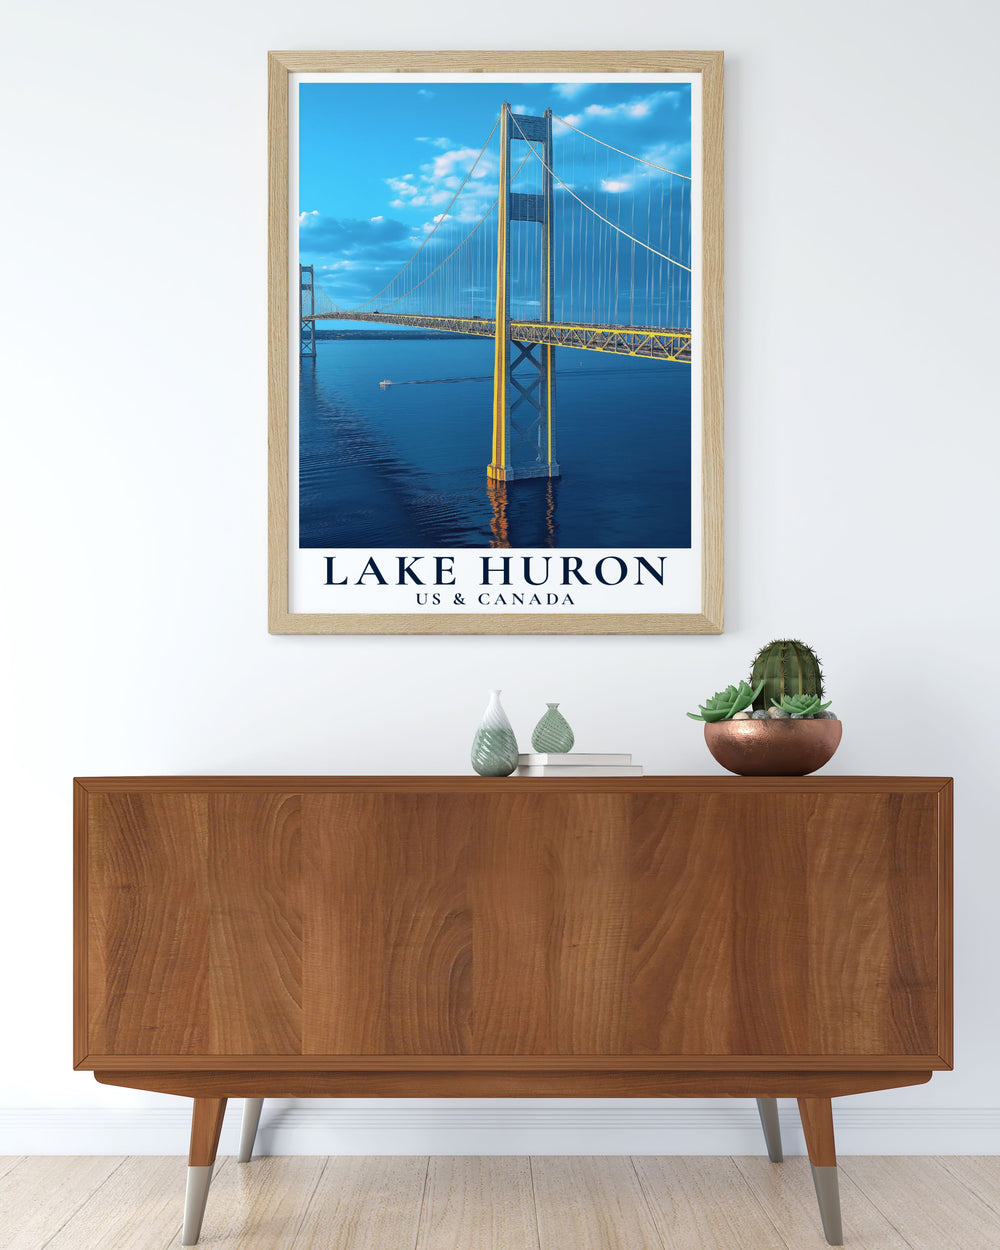 Add elegance to your home with this Lake Huron print featuring the Mackinac Bridge. This beautiful artwork portrays tranquil waters and picturesque landscapes making it a perfect addition to your decor and an ideal gift for special occasions